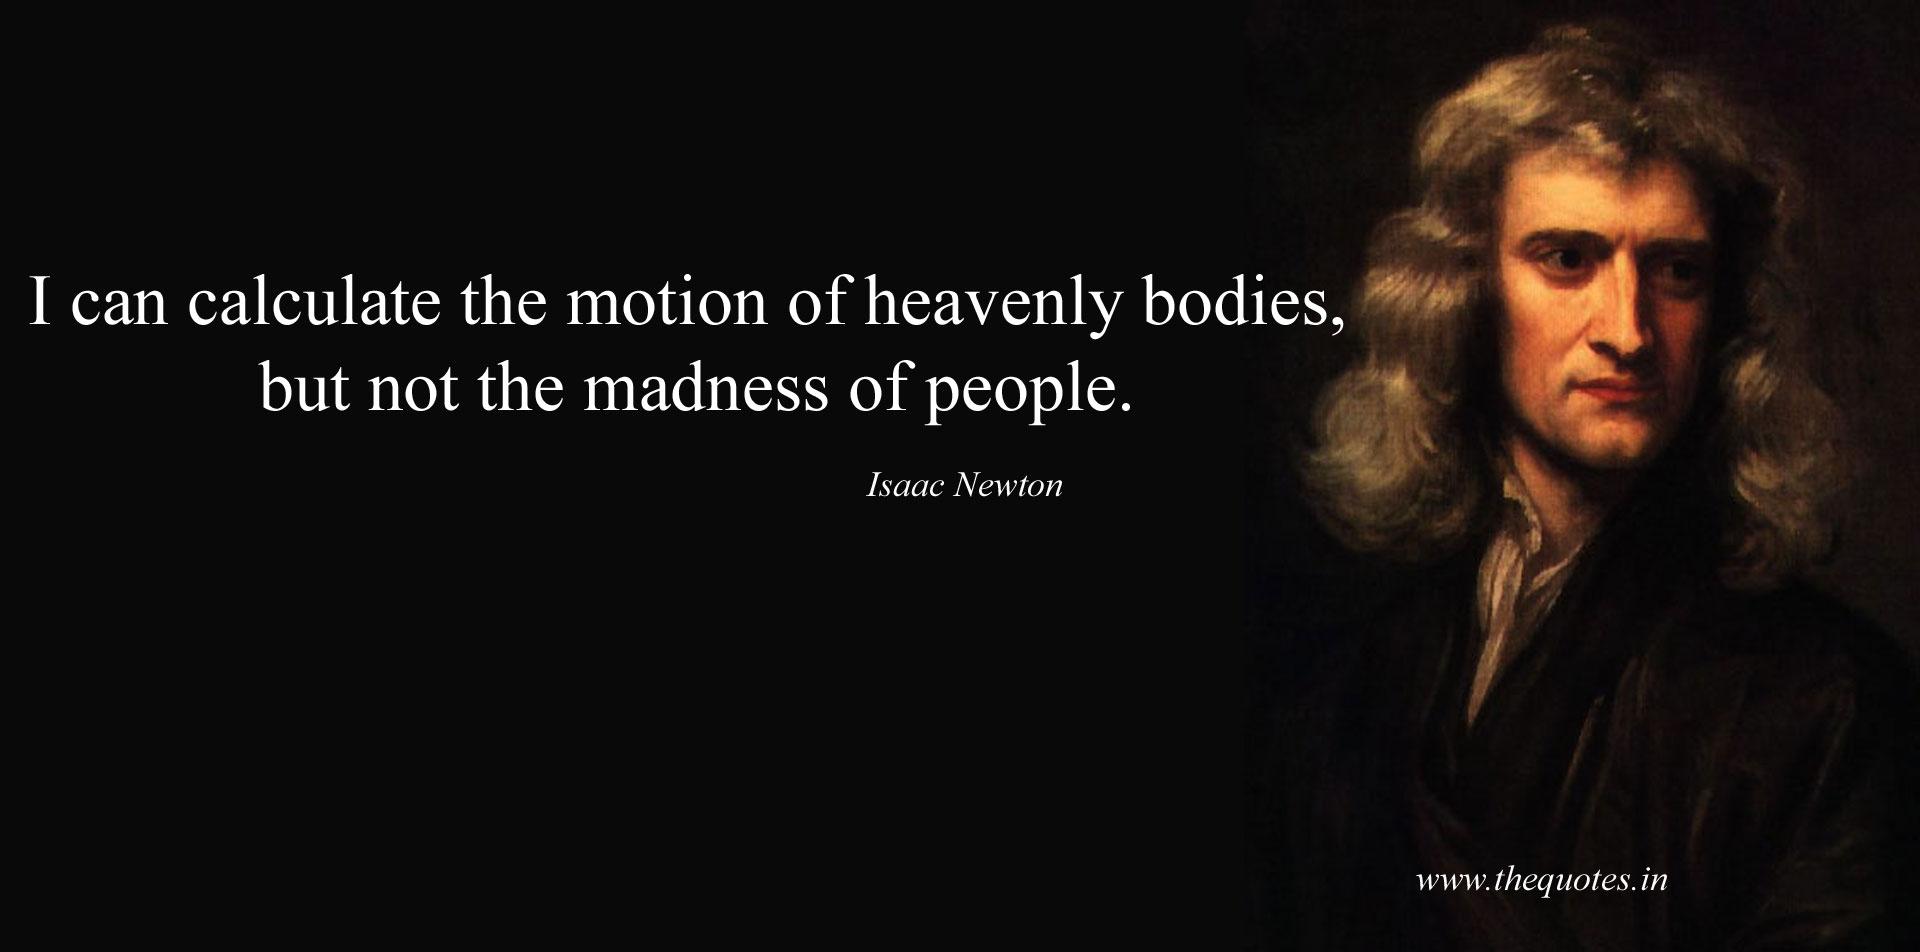 Isaac Newton Quotes Gallery